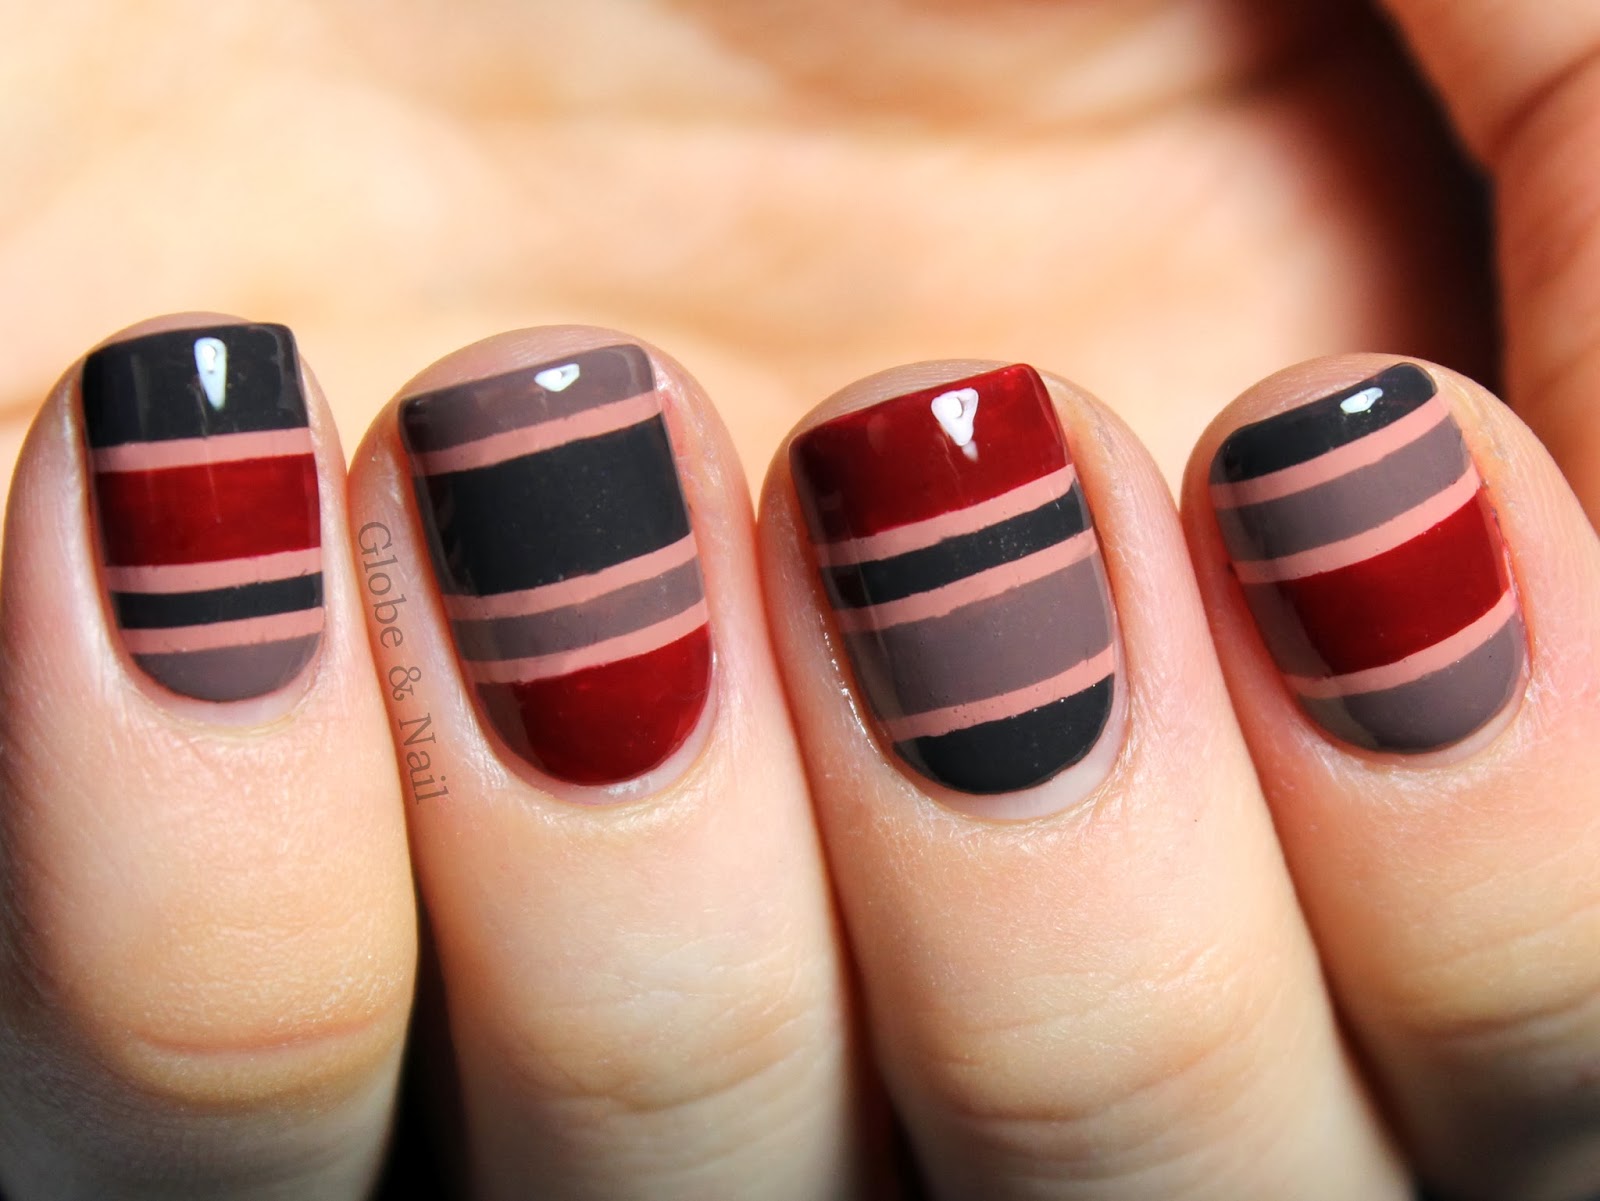 10. Black and Yellow Striped Nail Art - wide 2